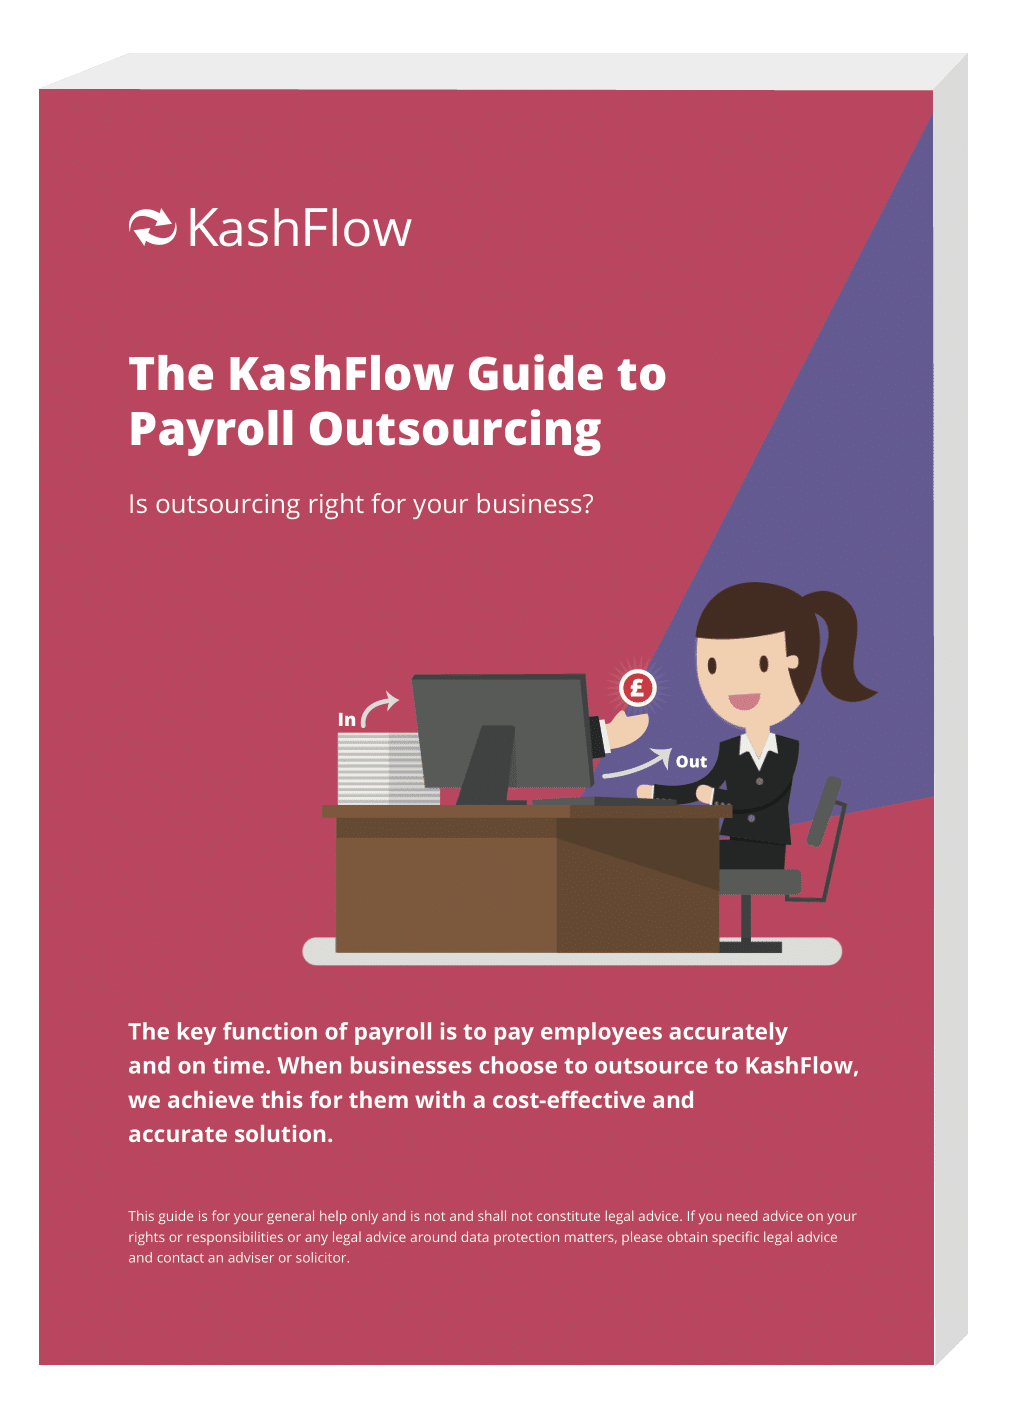 Front cover of KashFlow's Guide to Payroll Outsourcing